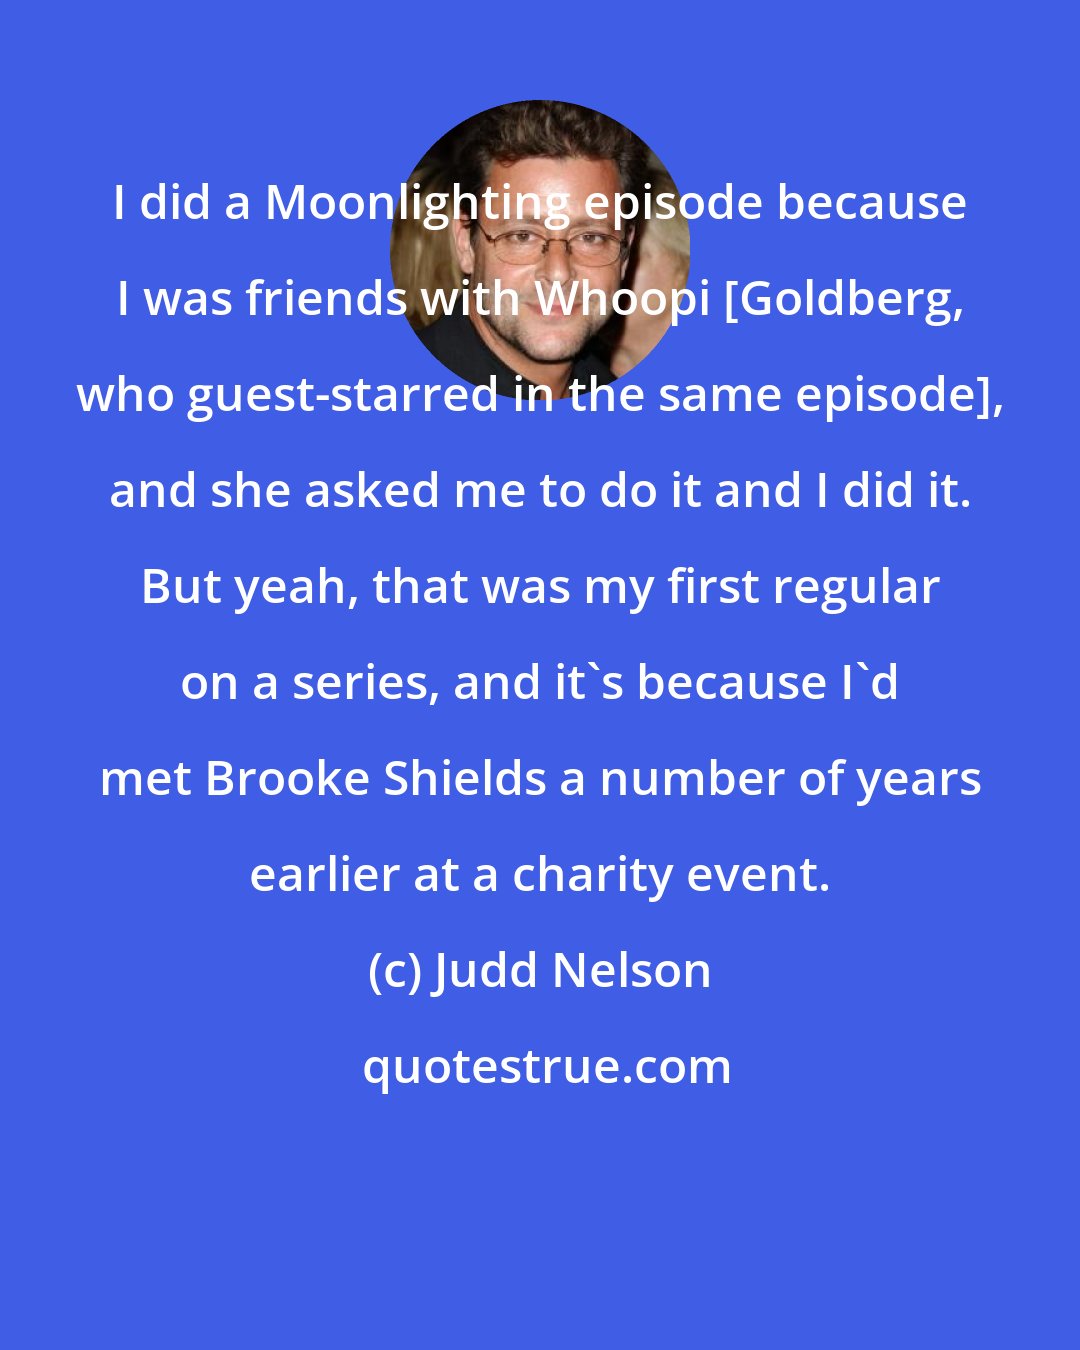 Judd Nelson: I did a Moonlighting episode because I was friends with Whoopi [Goldberg, who guest-starred in the same episode], and she asked me to do it and I did it. But yeah, that was my first regular on a series, and it's because I'd met Brooke Shields a number of years earlier at a charity event.